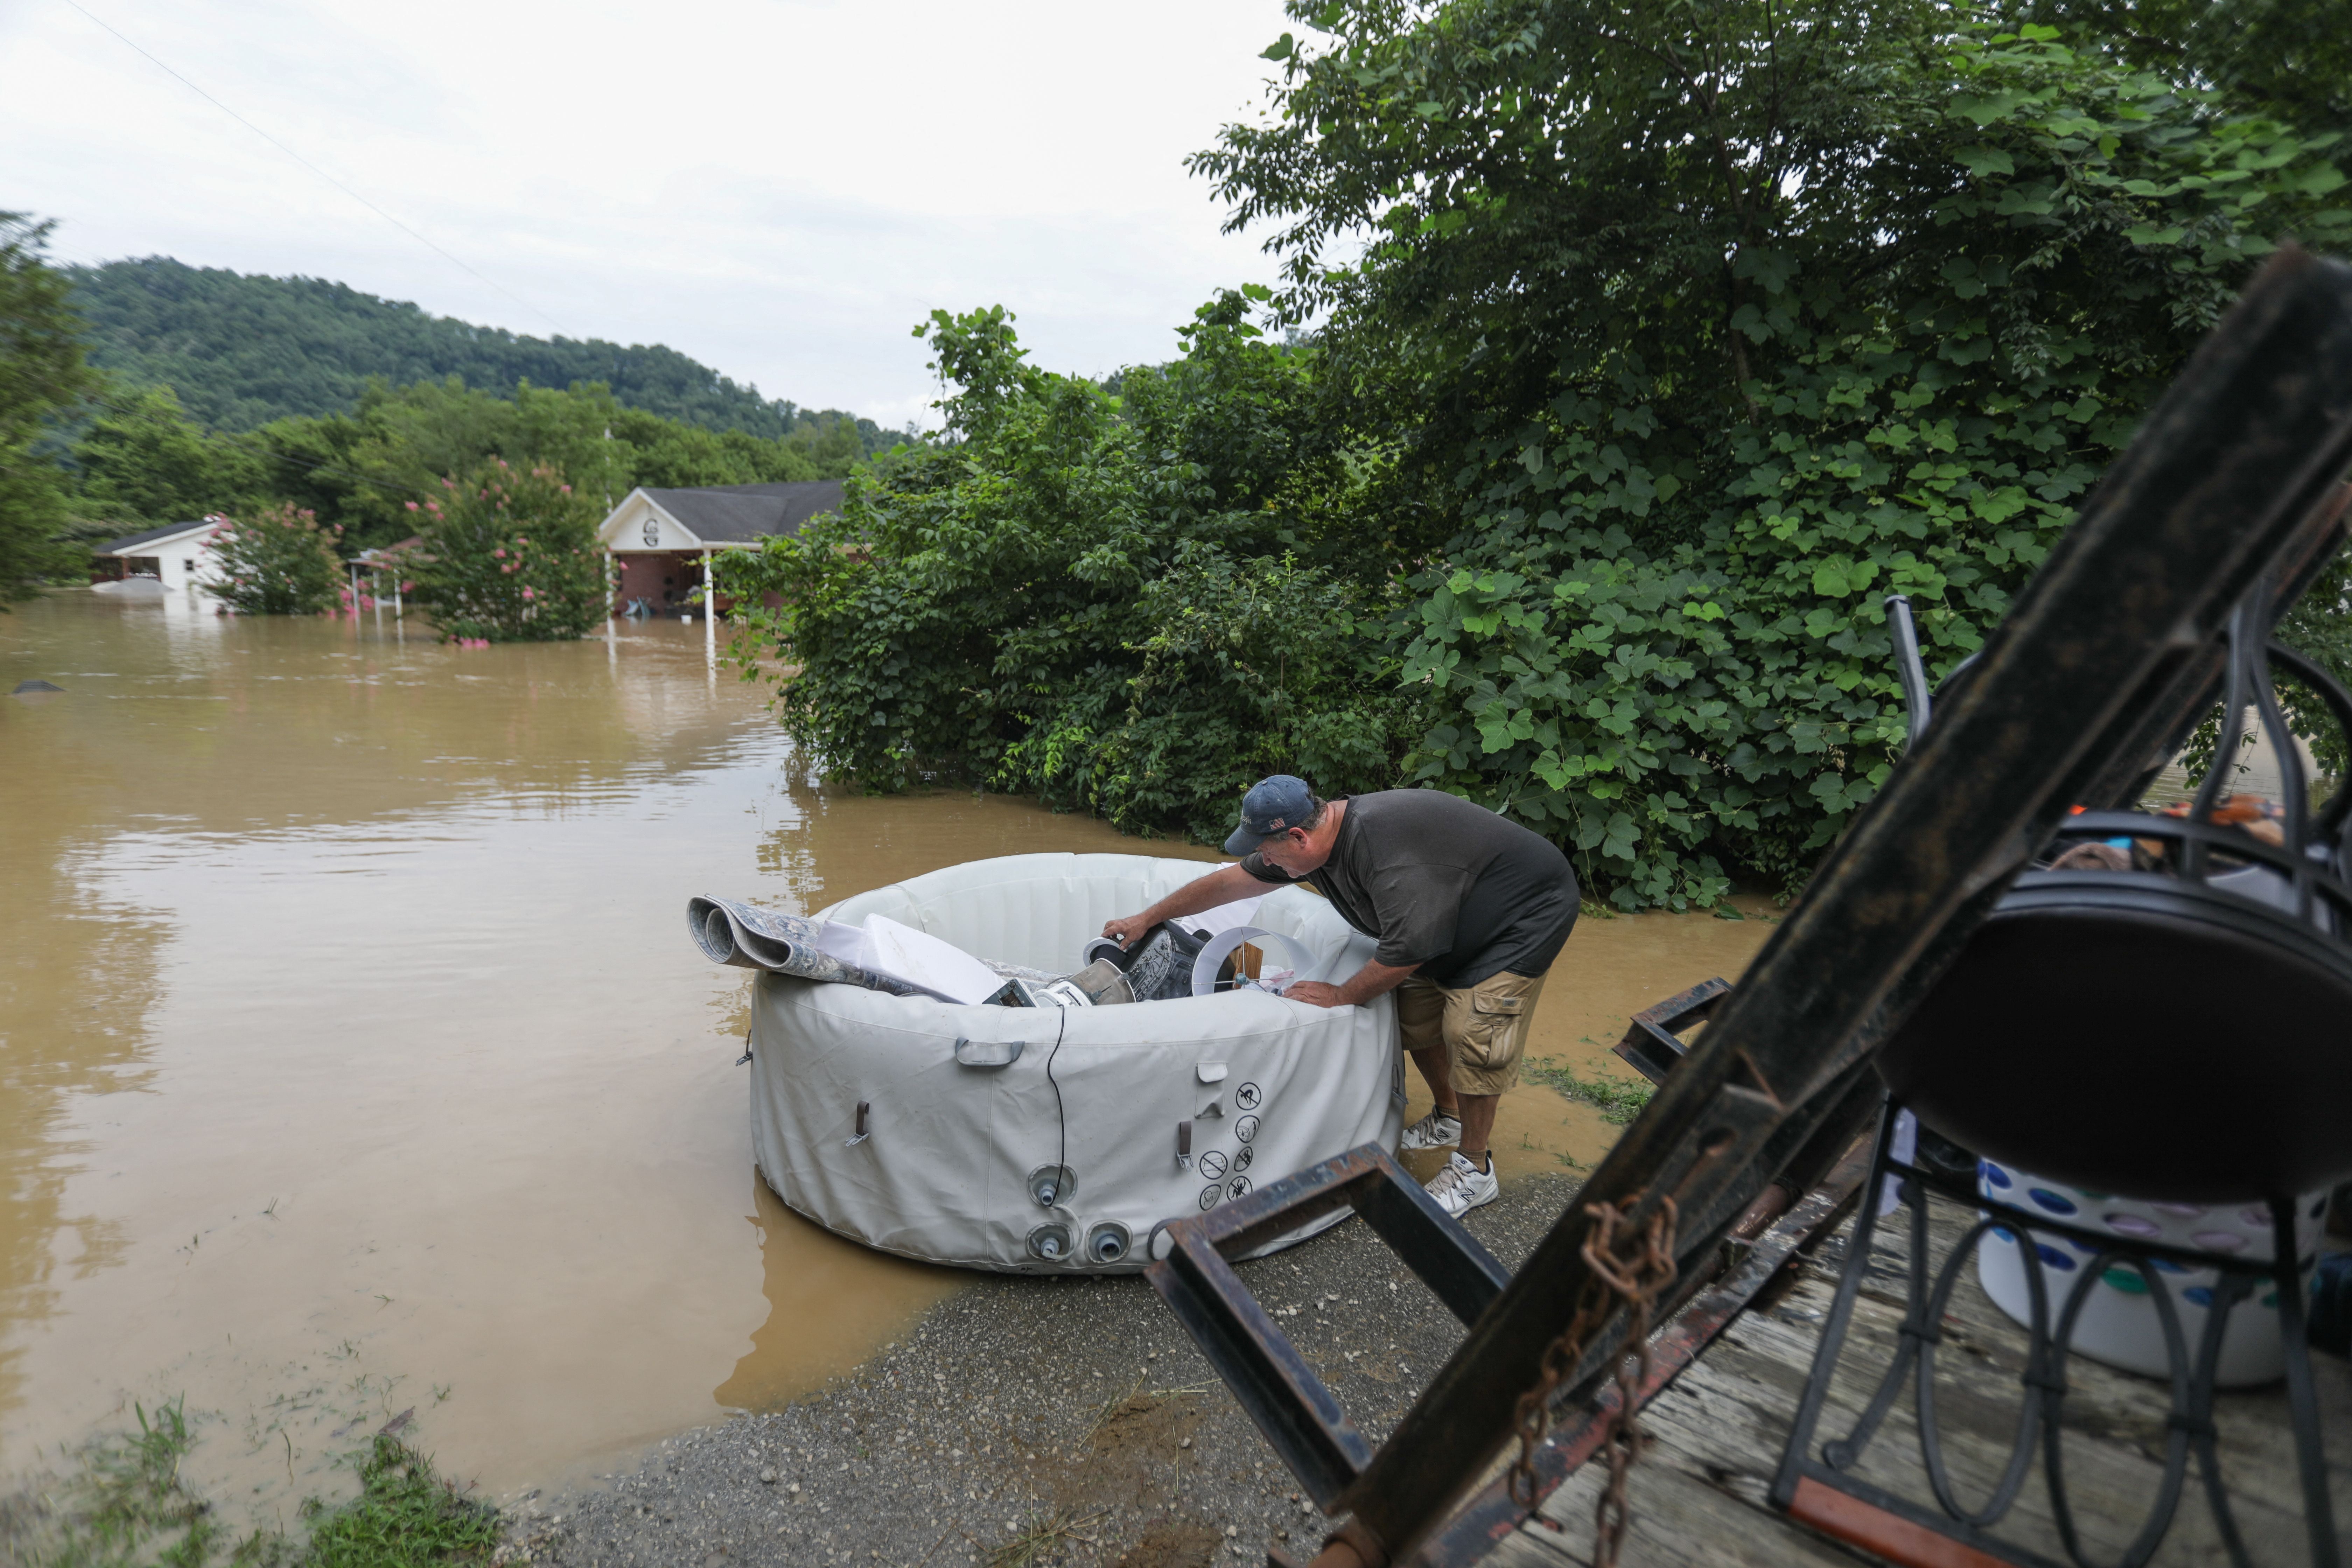 A man loads possessions into a floating device into waters around his home in Jackson.  (Photo: Leandro Lozada / AFP, Getty Images)